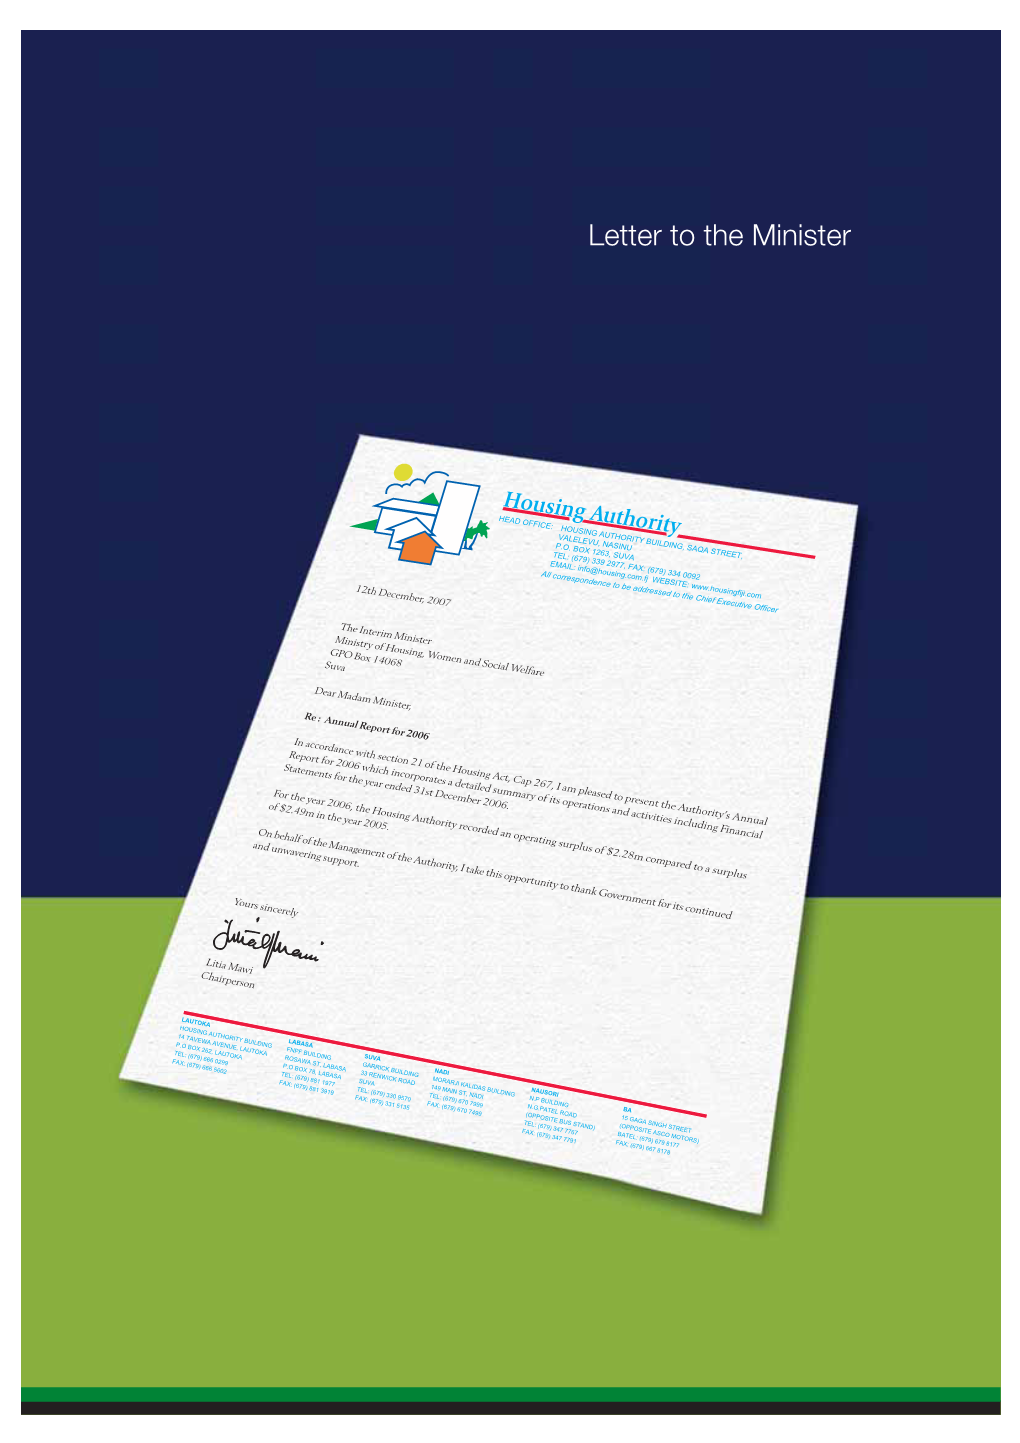 Letter to the Minister 02 Board of Directors